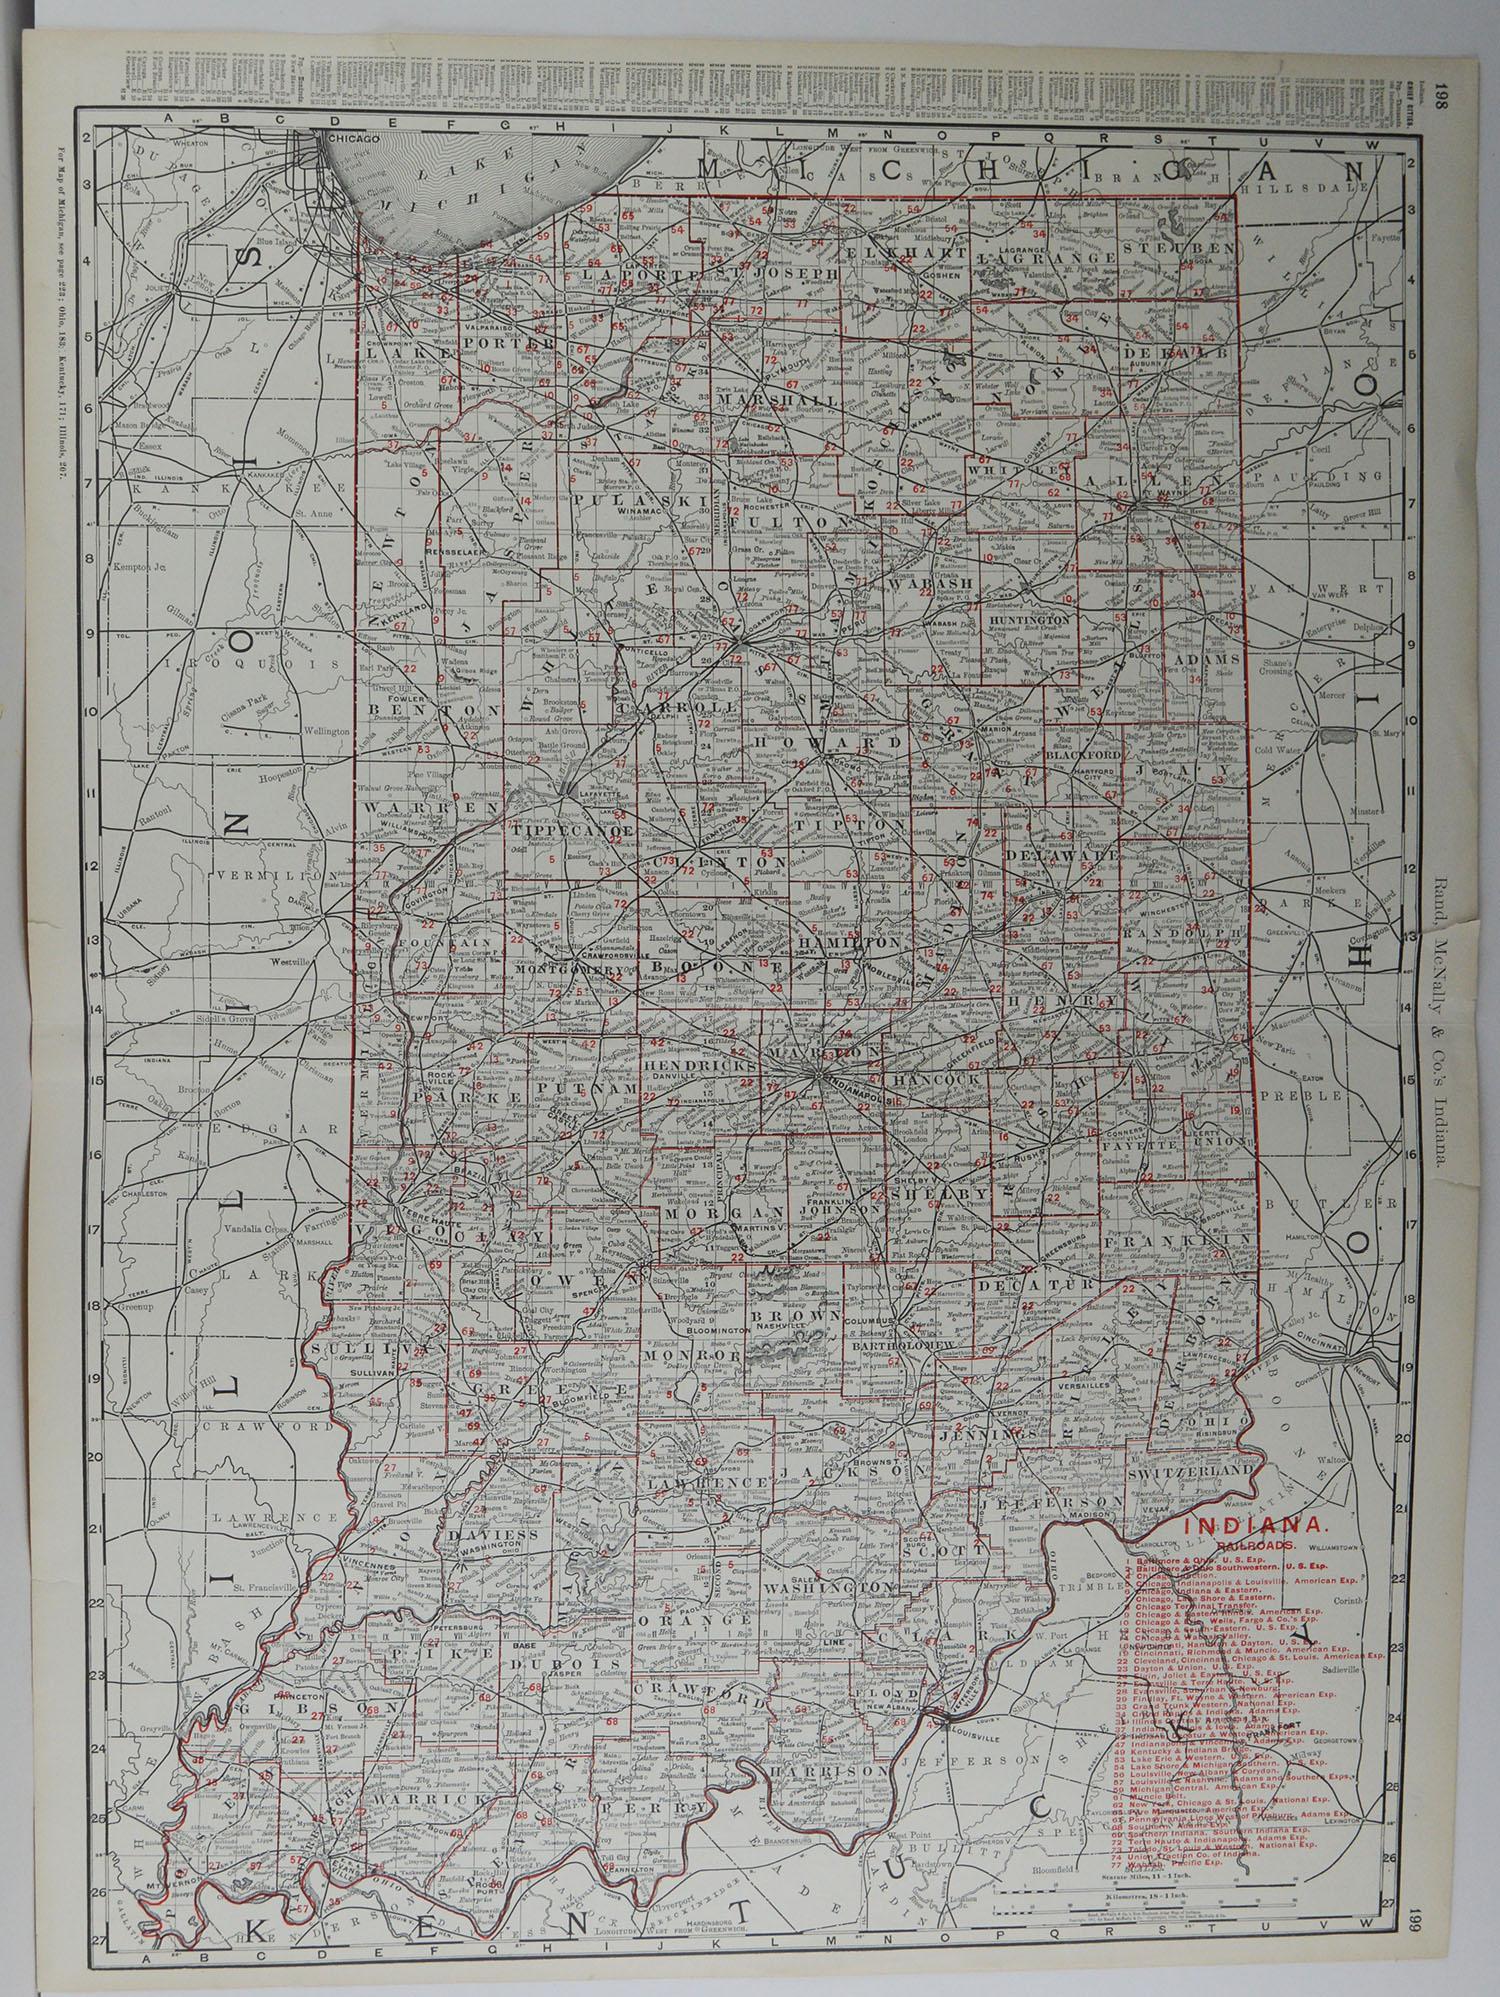 Fabulous monochrome map with red outline color 

Original color

By Rand, McNally & Co.

Published circa 1900

Unframed

Repairs to minor edge tears.